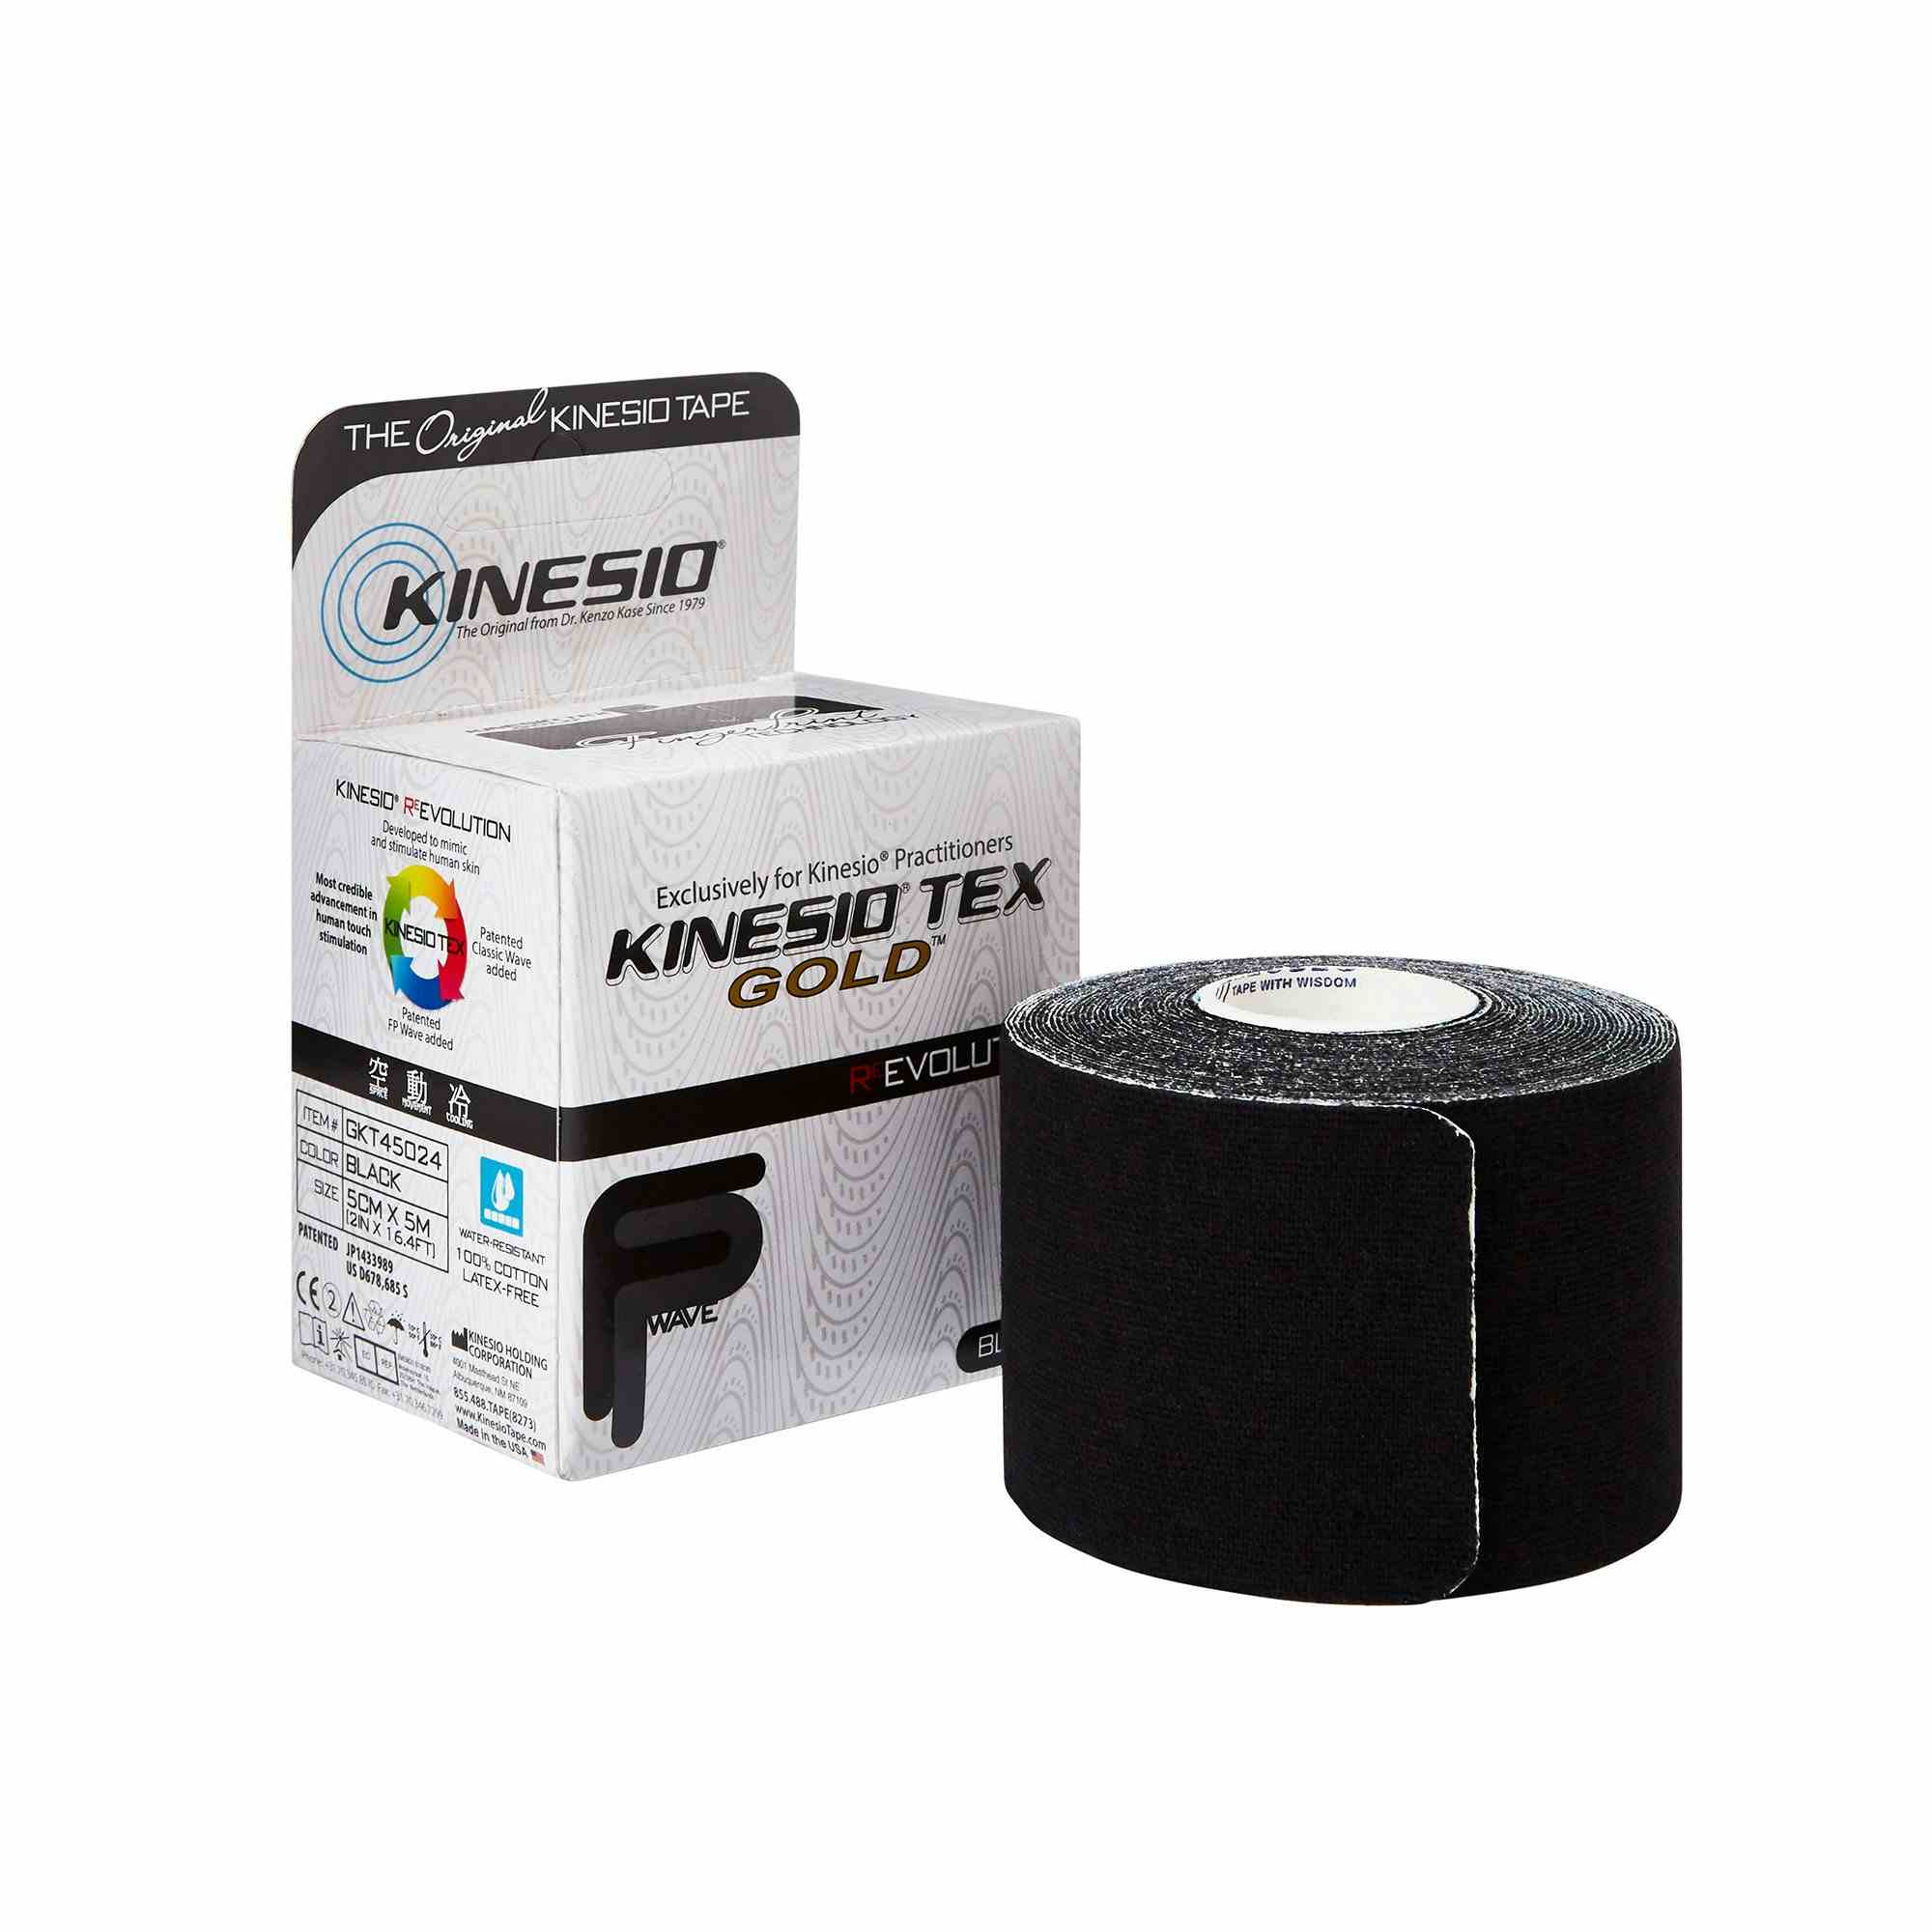 Kinesio Tex Gold Kinesiology Tape, Black, Water-Resistant Cotton, 2 Inch x 5½ Yard, 24-4916, 1 Each